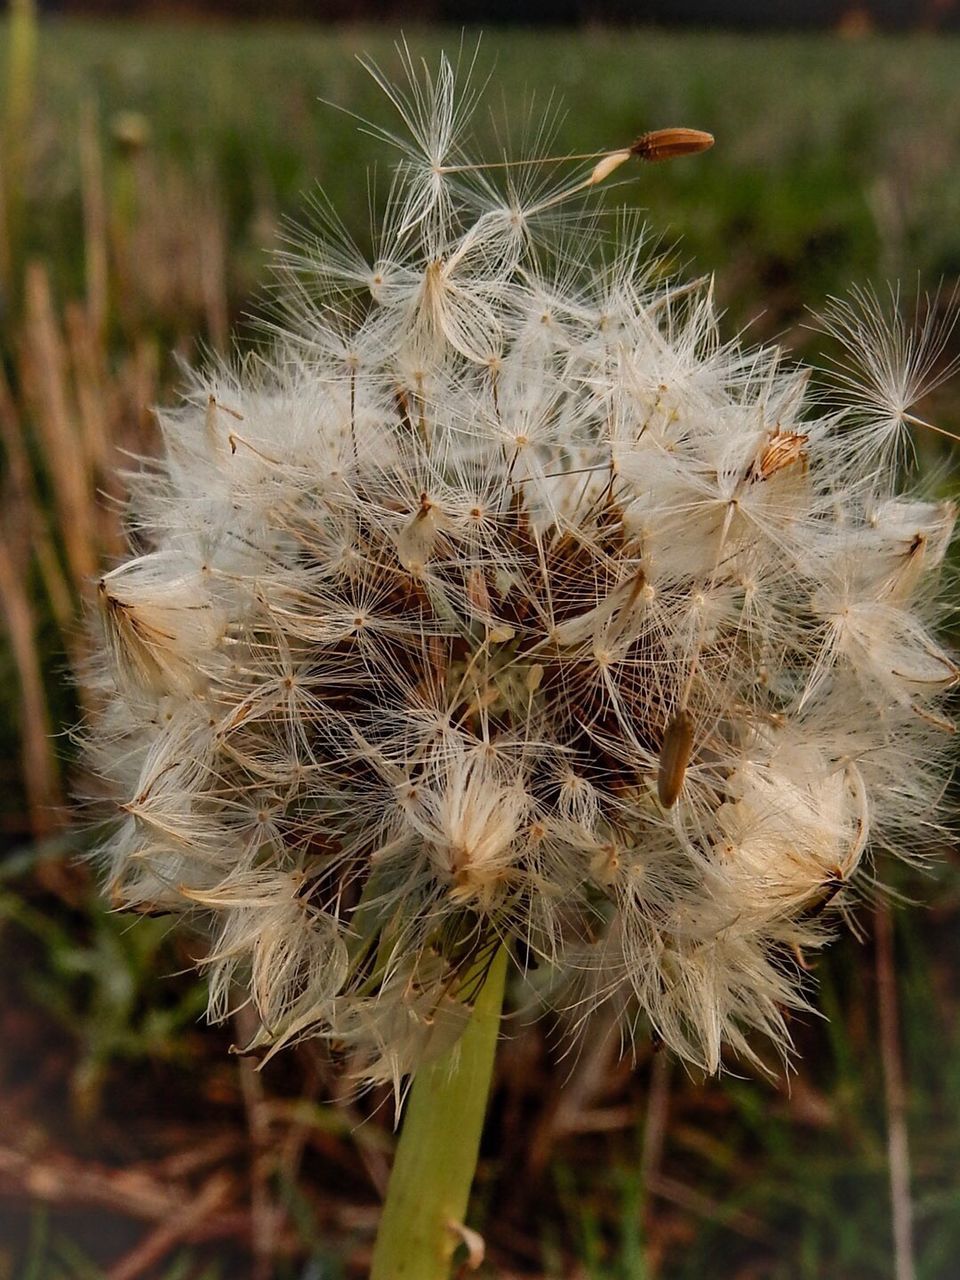 CLOSE-UP OF THISTLE IN AUTUMN